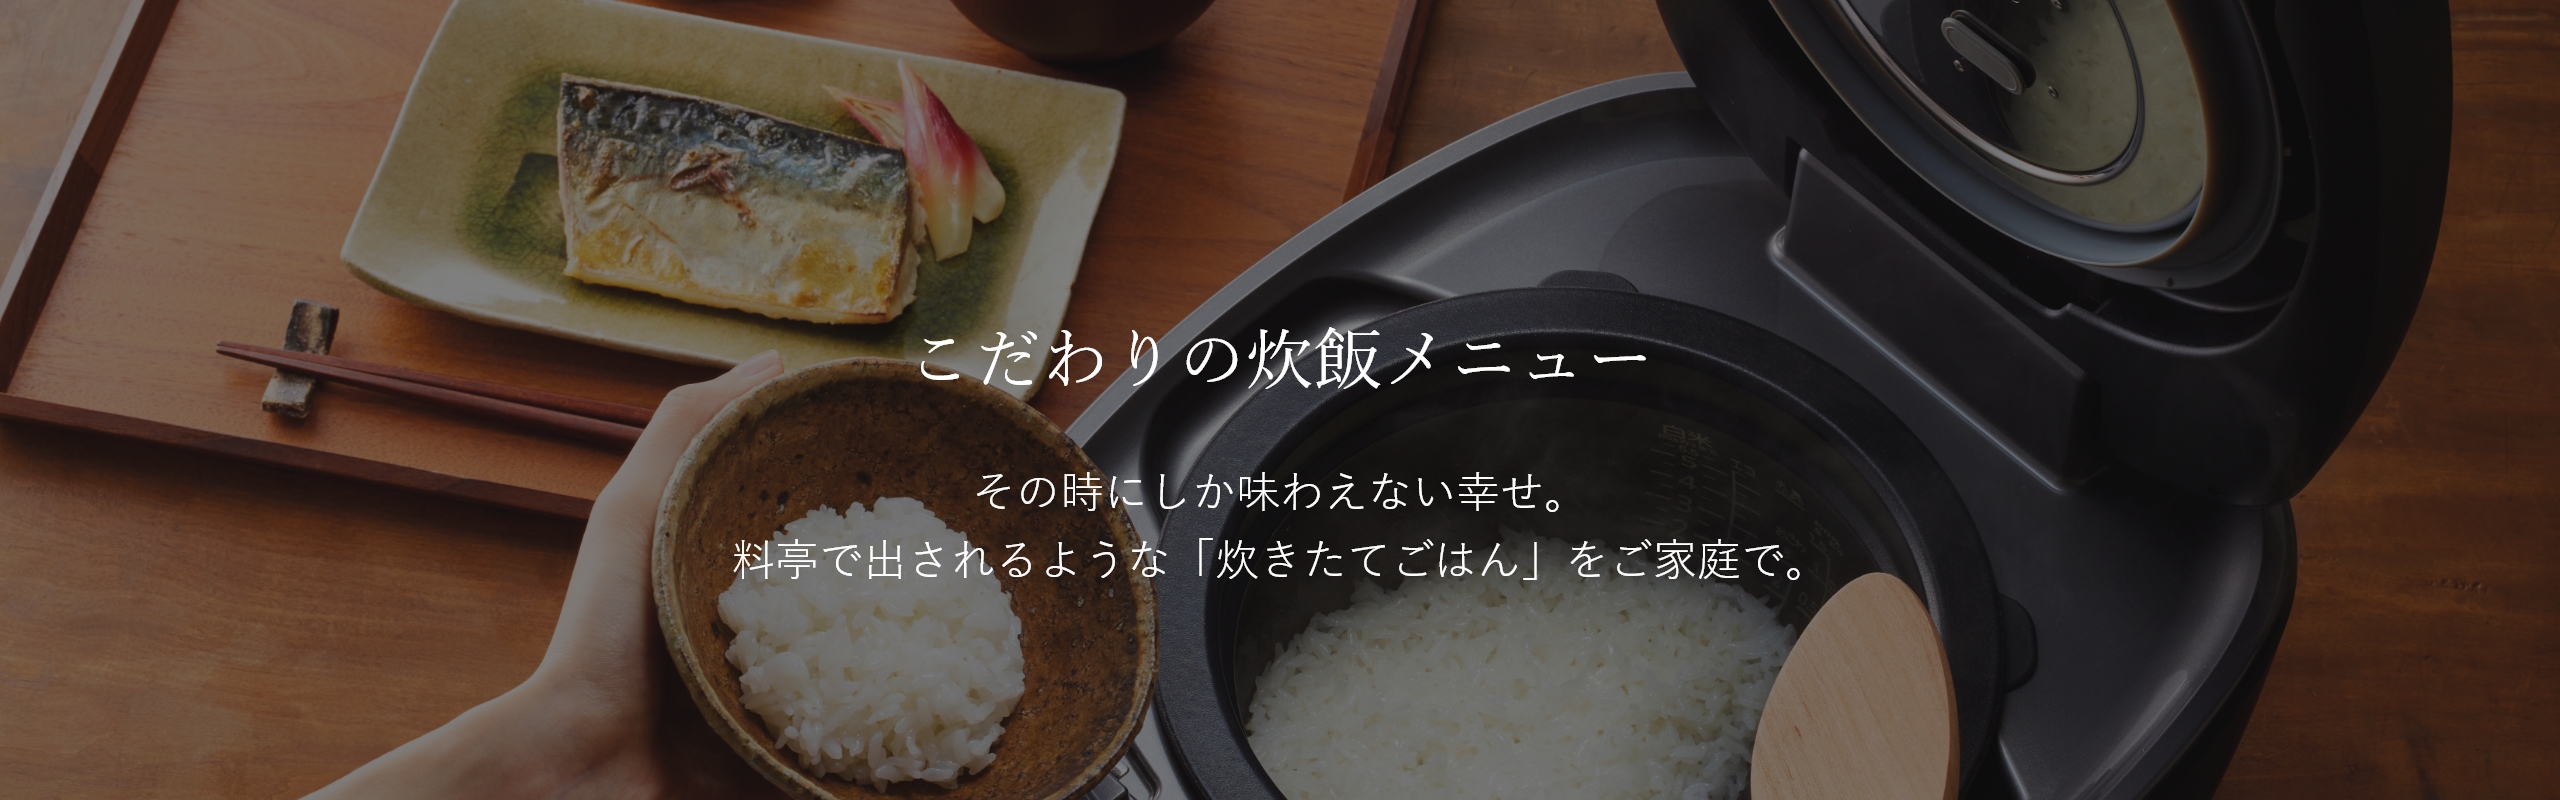 Special Rice Cooking Settings. Happiness that can be experienced only at the moment Enjoy freshly cooked rice as good as that cooked in a Japanese-style luxury restaurant at home.